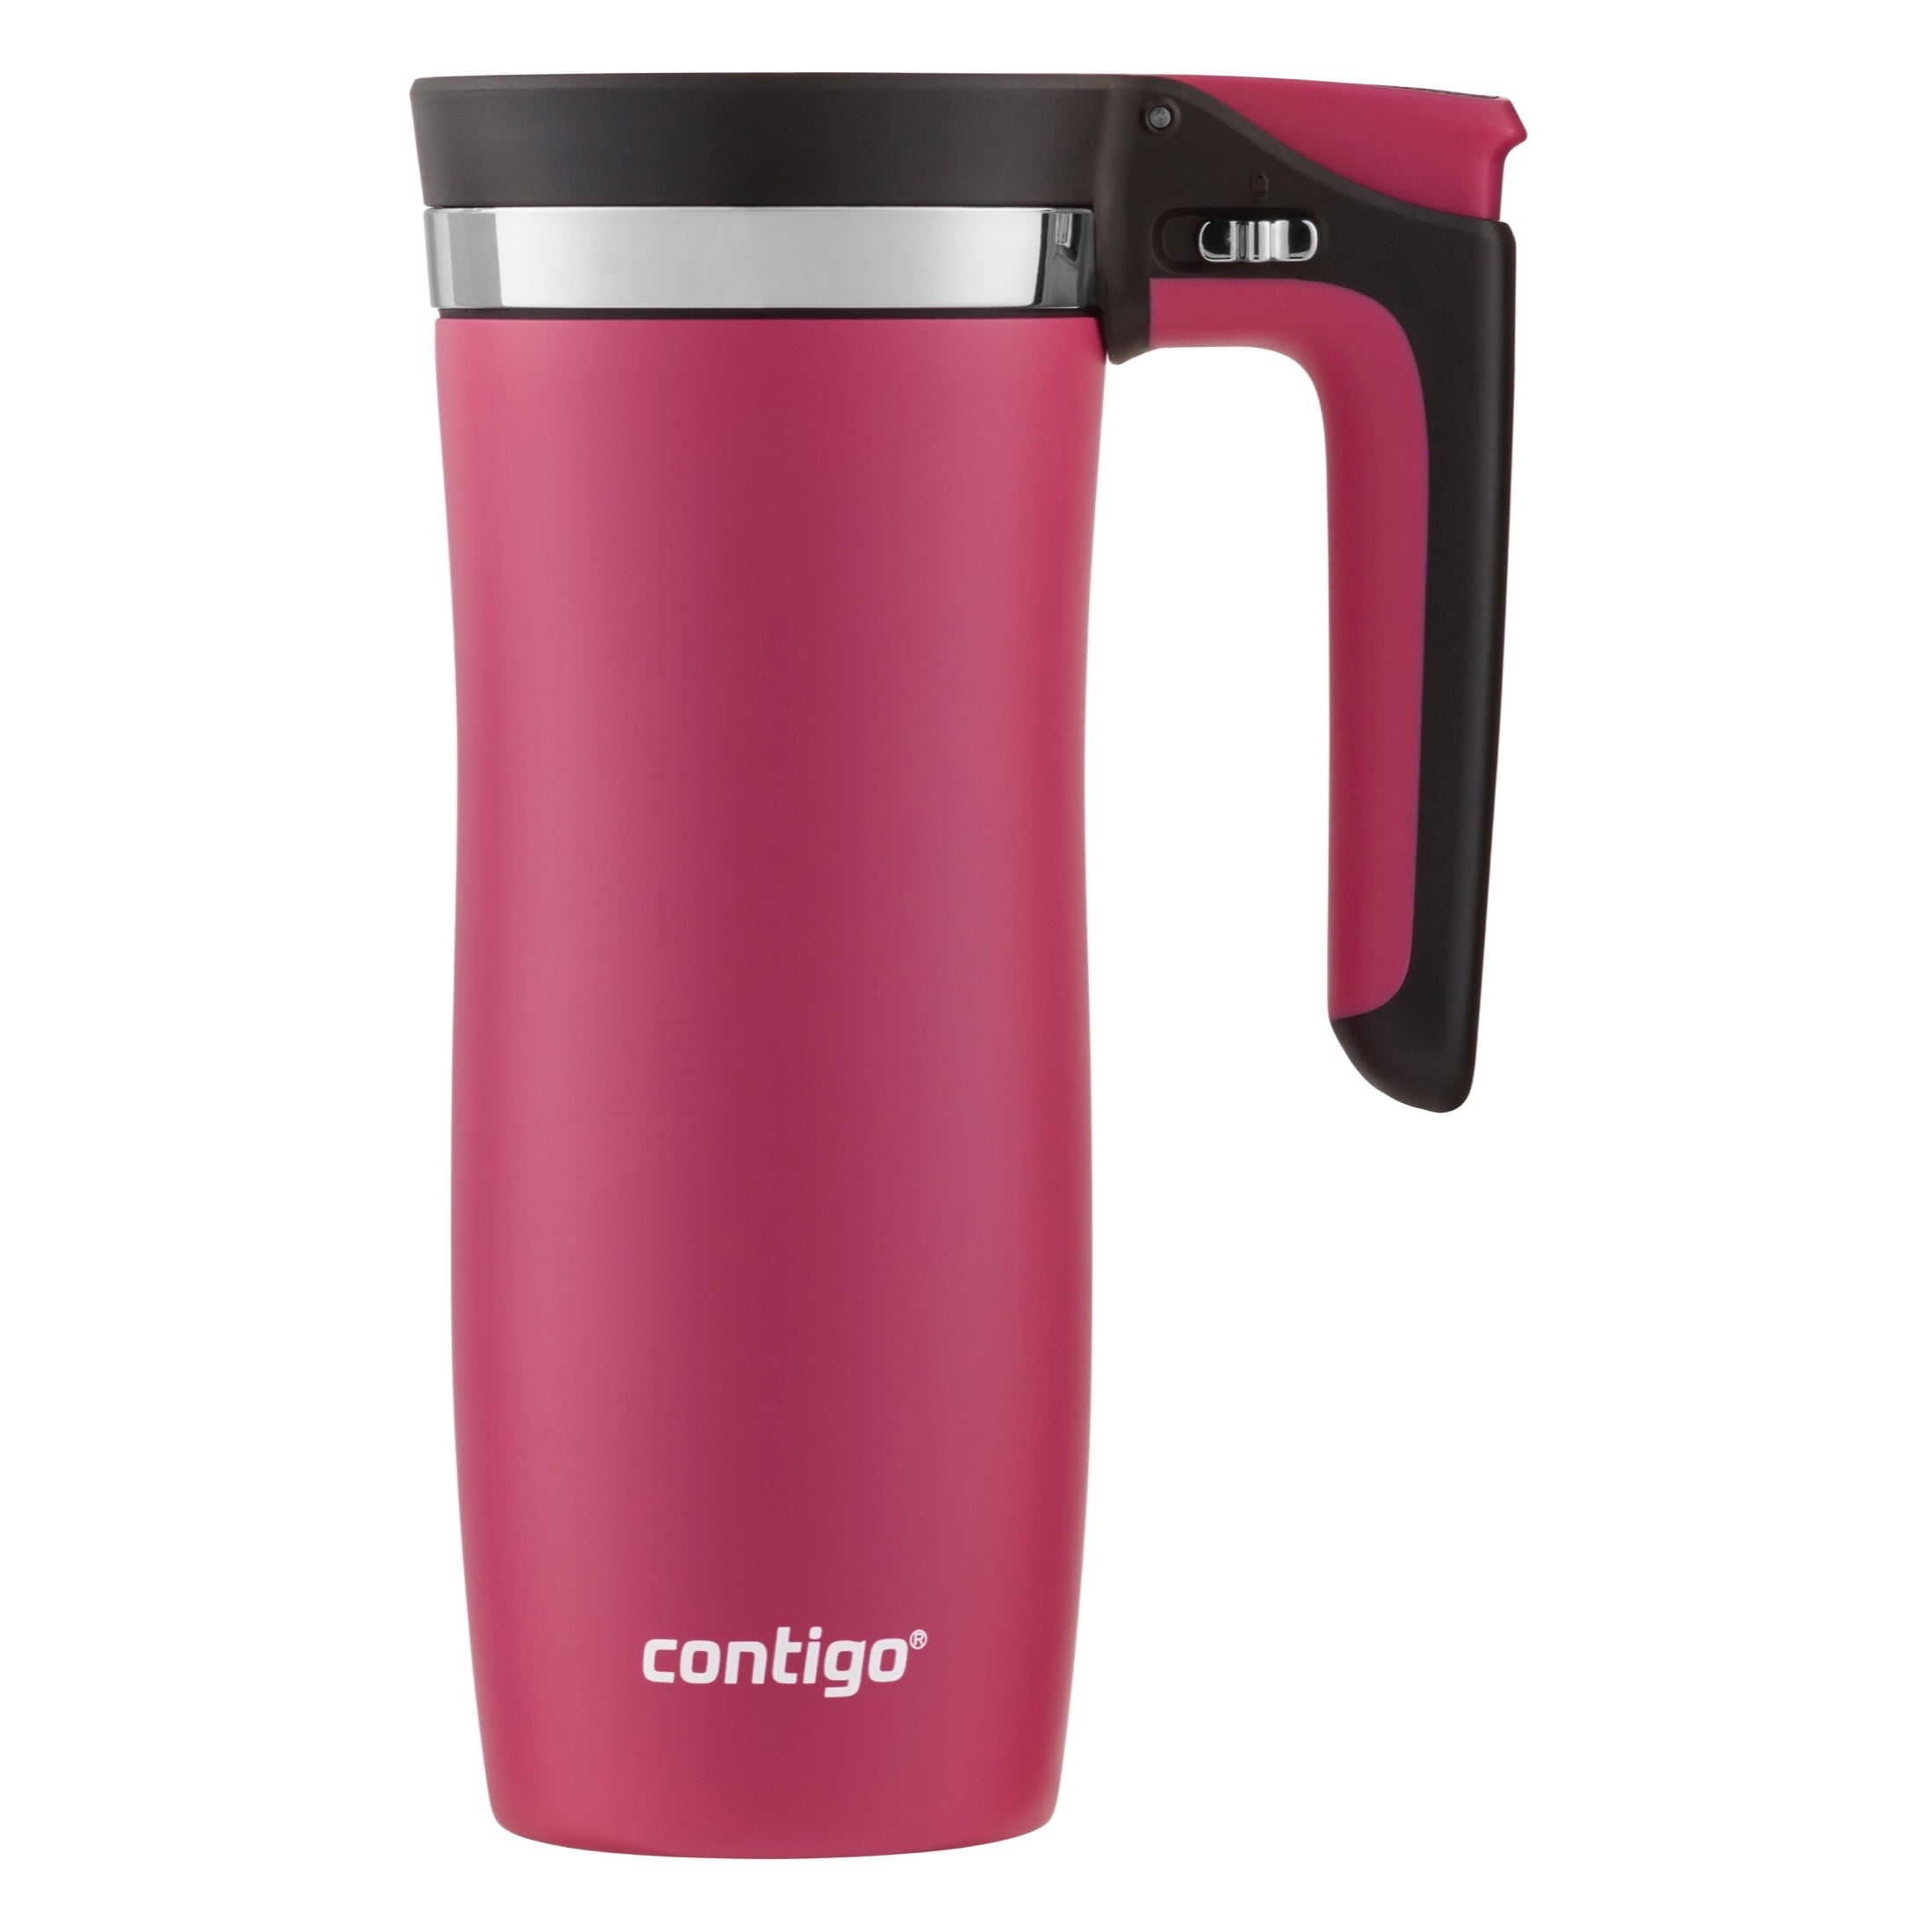 Contigo Stainless Steel Travel Mug with AUTOSEAL Lid and Handle 